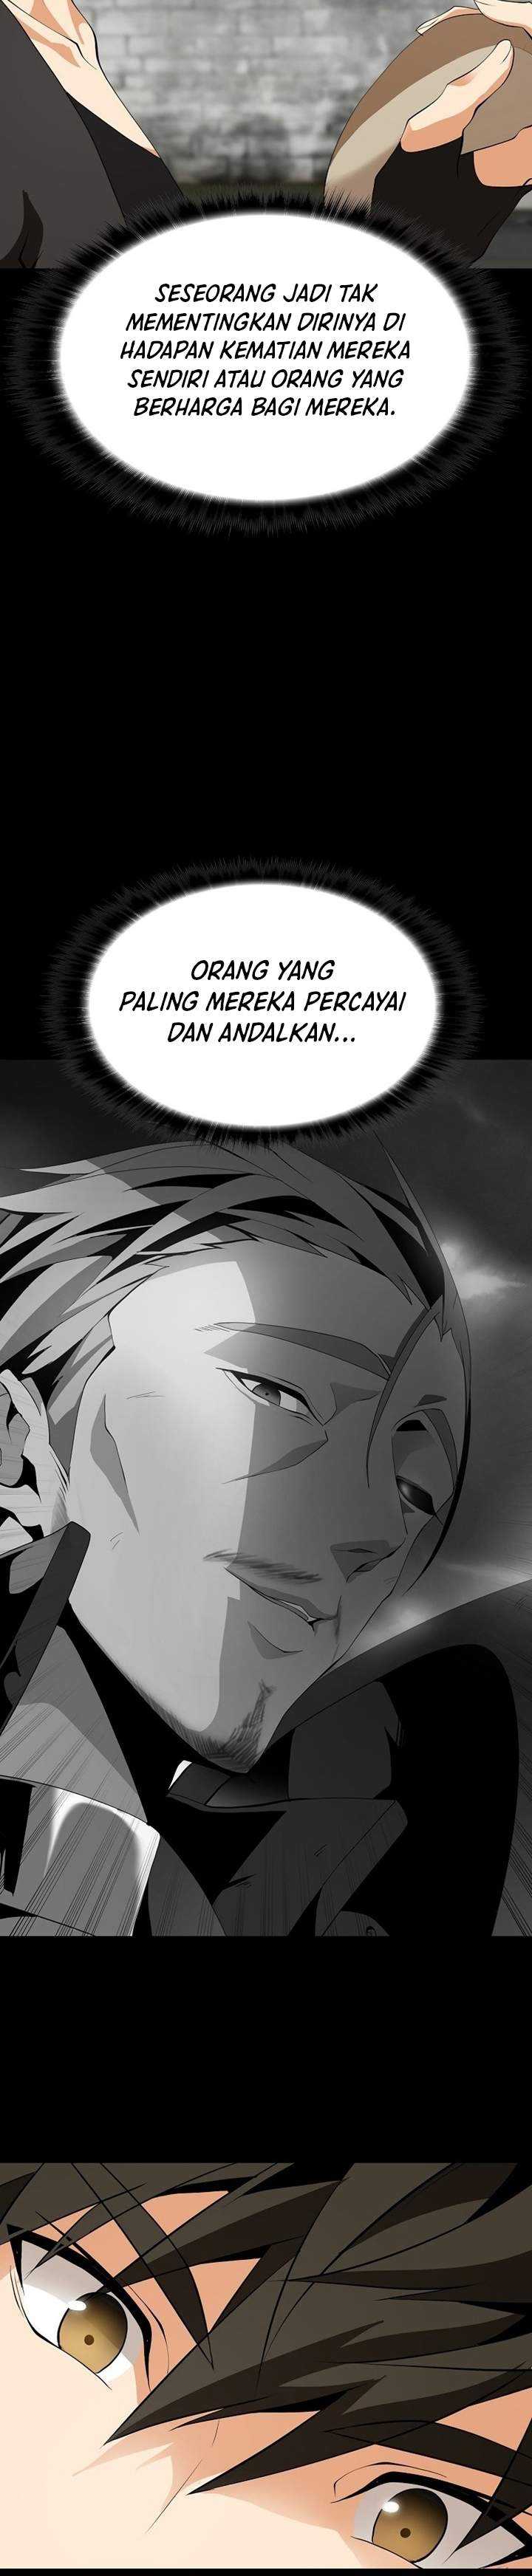 Messiah: End of the Gods Chapter 09